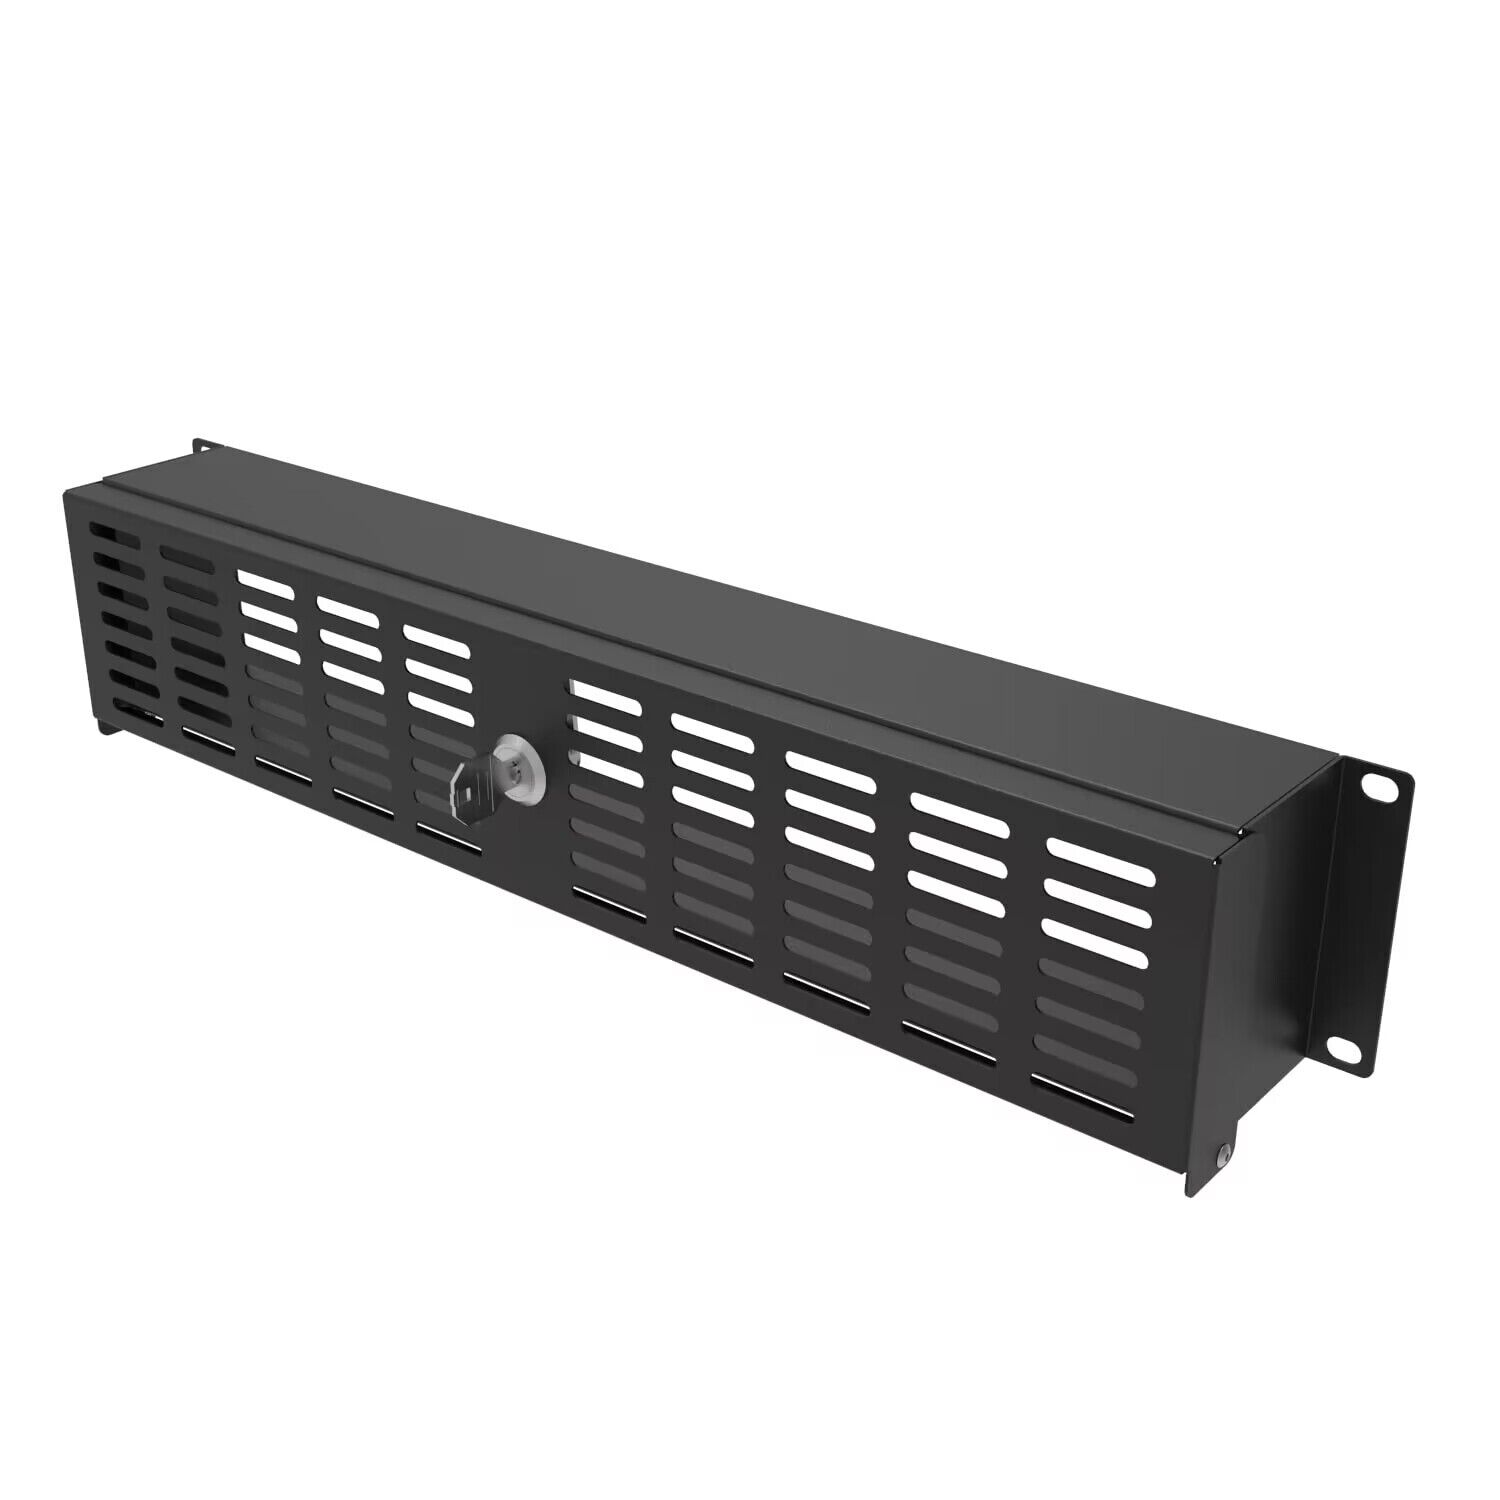 2U Rack Security Cover with Hinged Locking Panel Door for  19